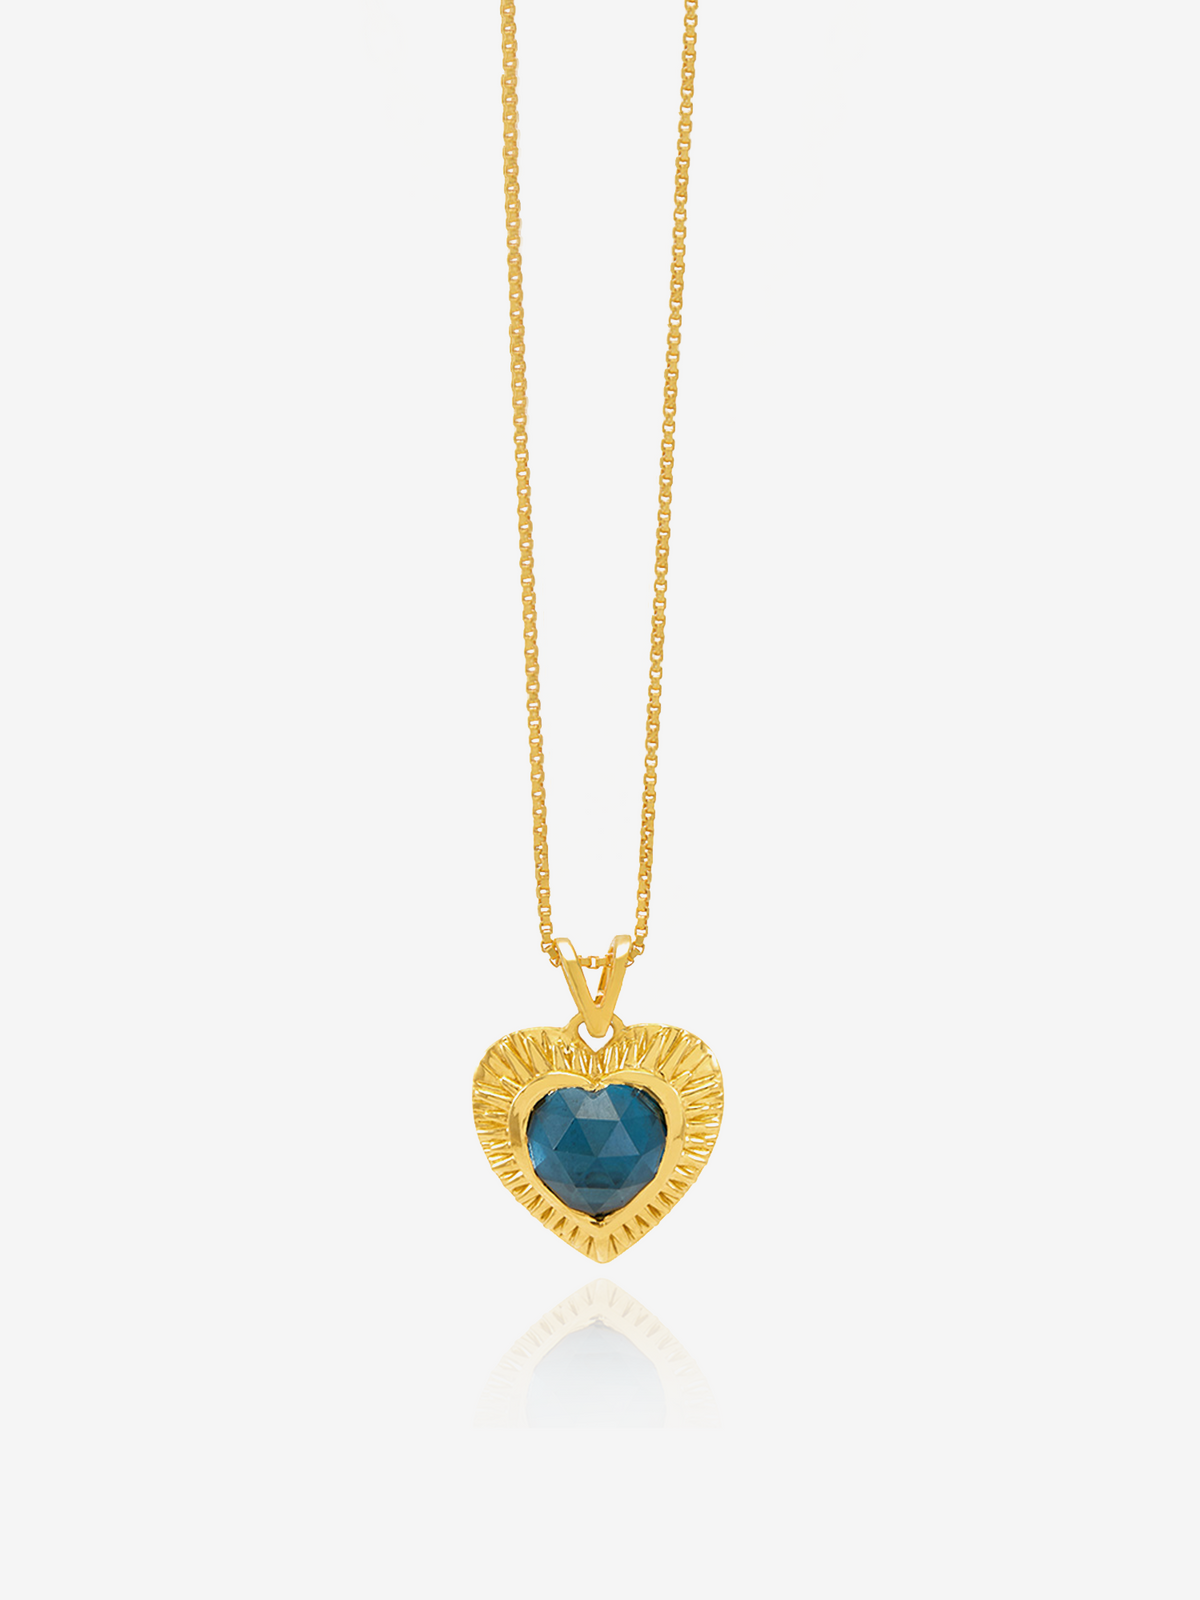 Personalised Electric Love Blue Topaz Heart Necklace